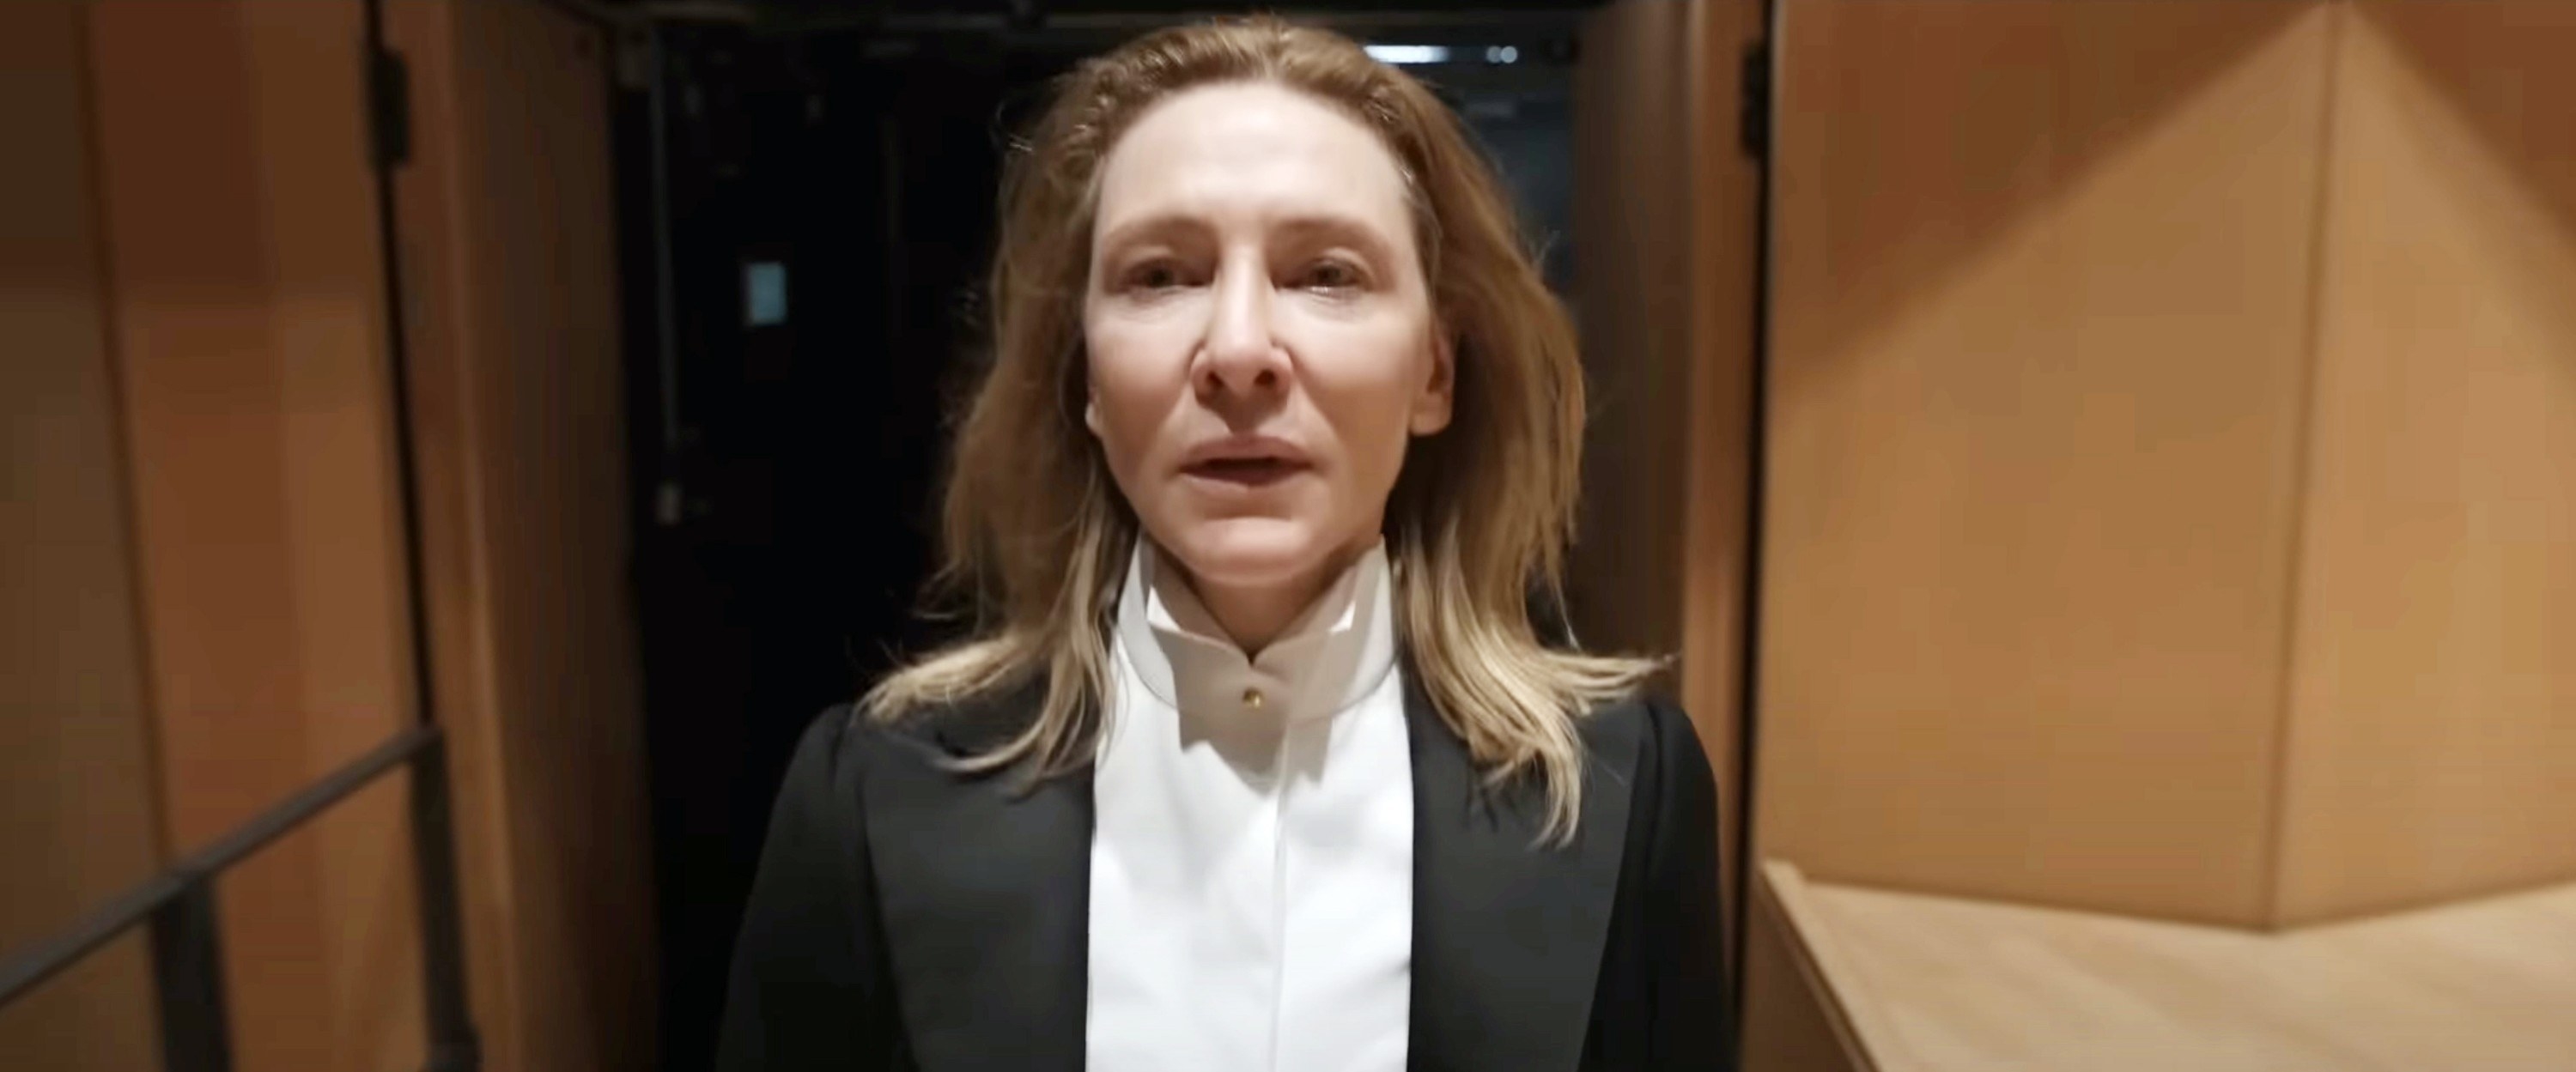 Cate Blanchett as Lydia in a conductor&#x27;s outfit looking apprehensive in &quot;TÁR&quot;